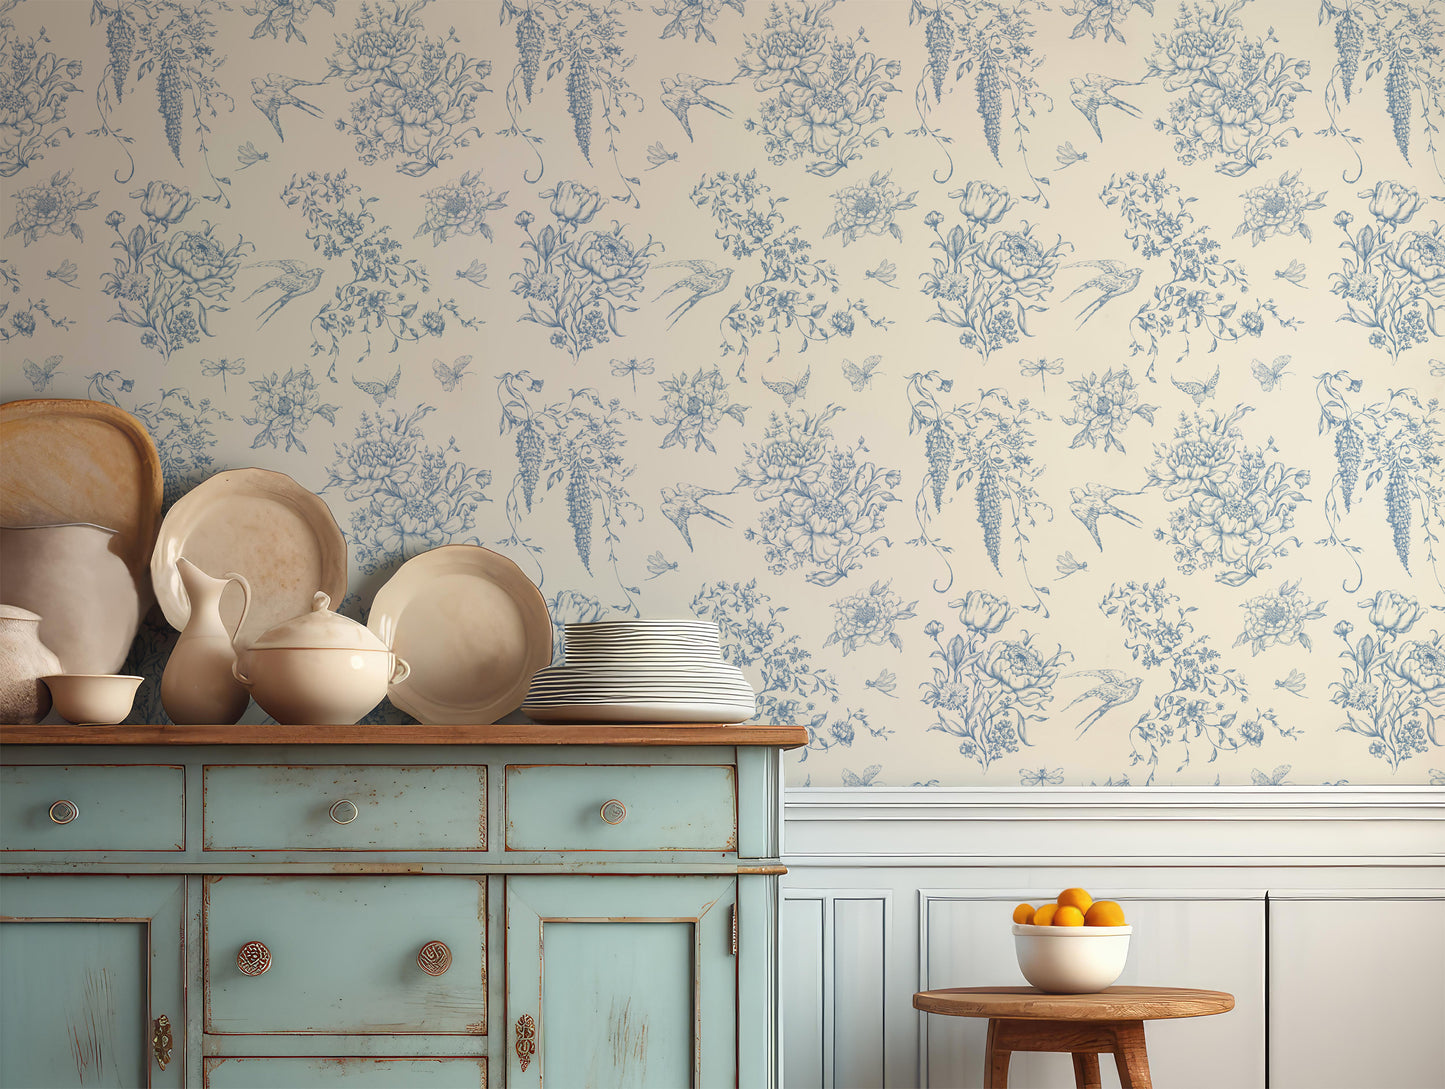 French country style, peel and stick wallpaper, blue and beige wallpaper, warm vintage decor